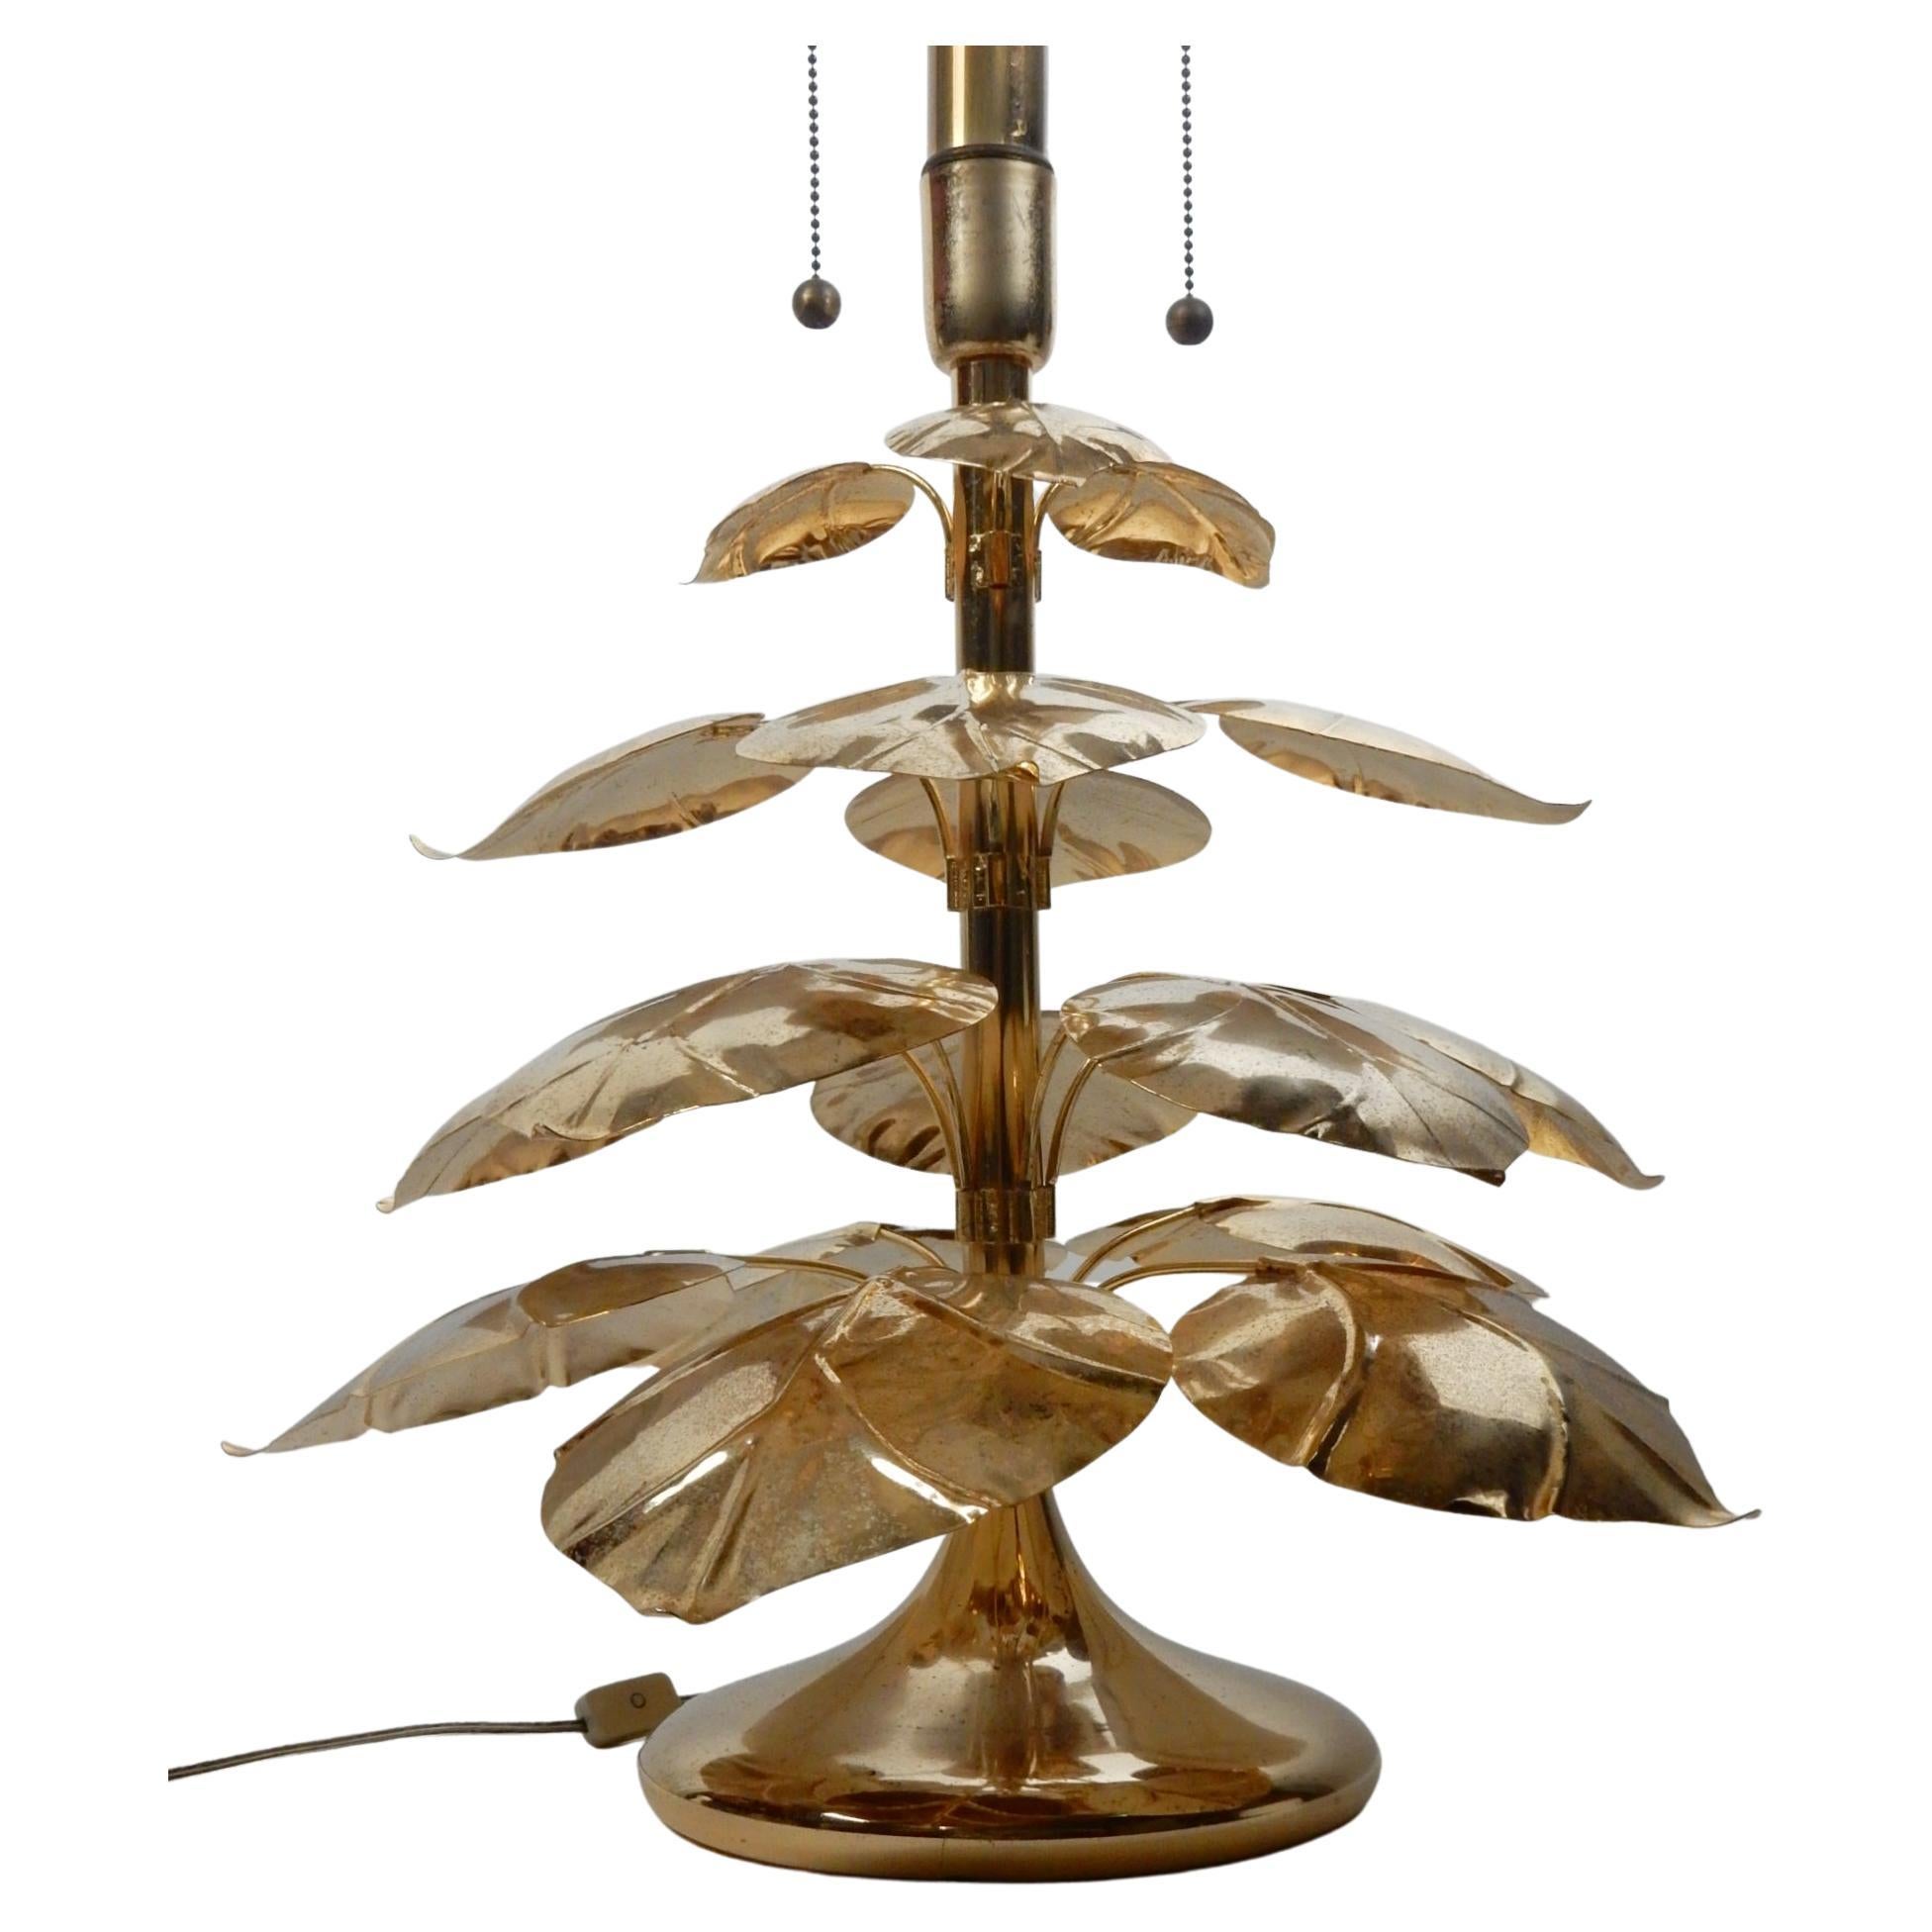 Incredible stylized brass broad leaf plant sculpture table lamp.
Unique statement piece for an eclectic decorum.
Made in Italy circa 1970's.
Requires 2 standard light bulbs. Off/On switch in cord
as well as pull chain for each socket.
Works